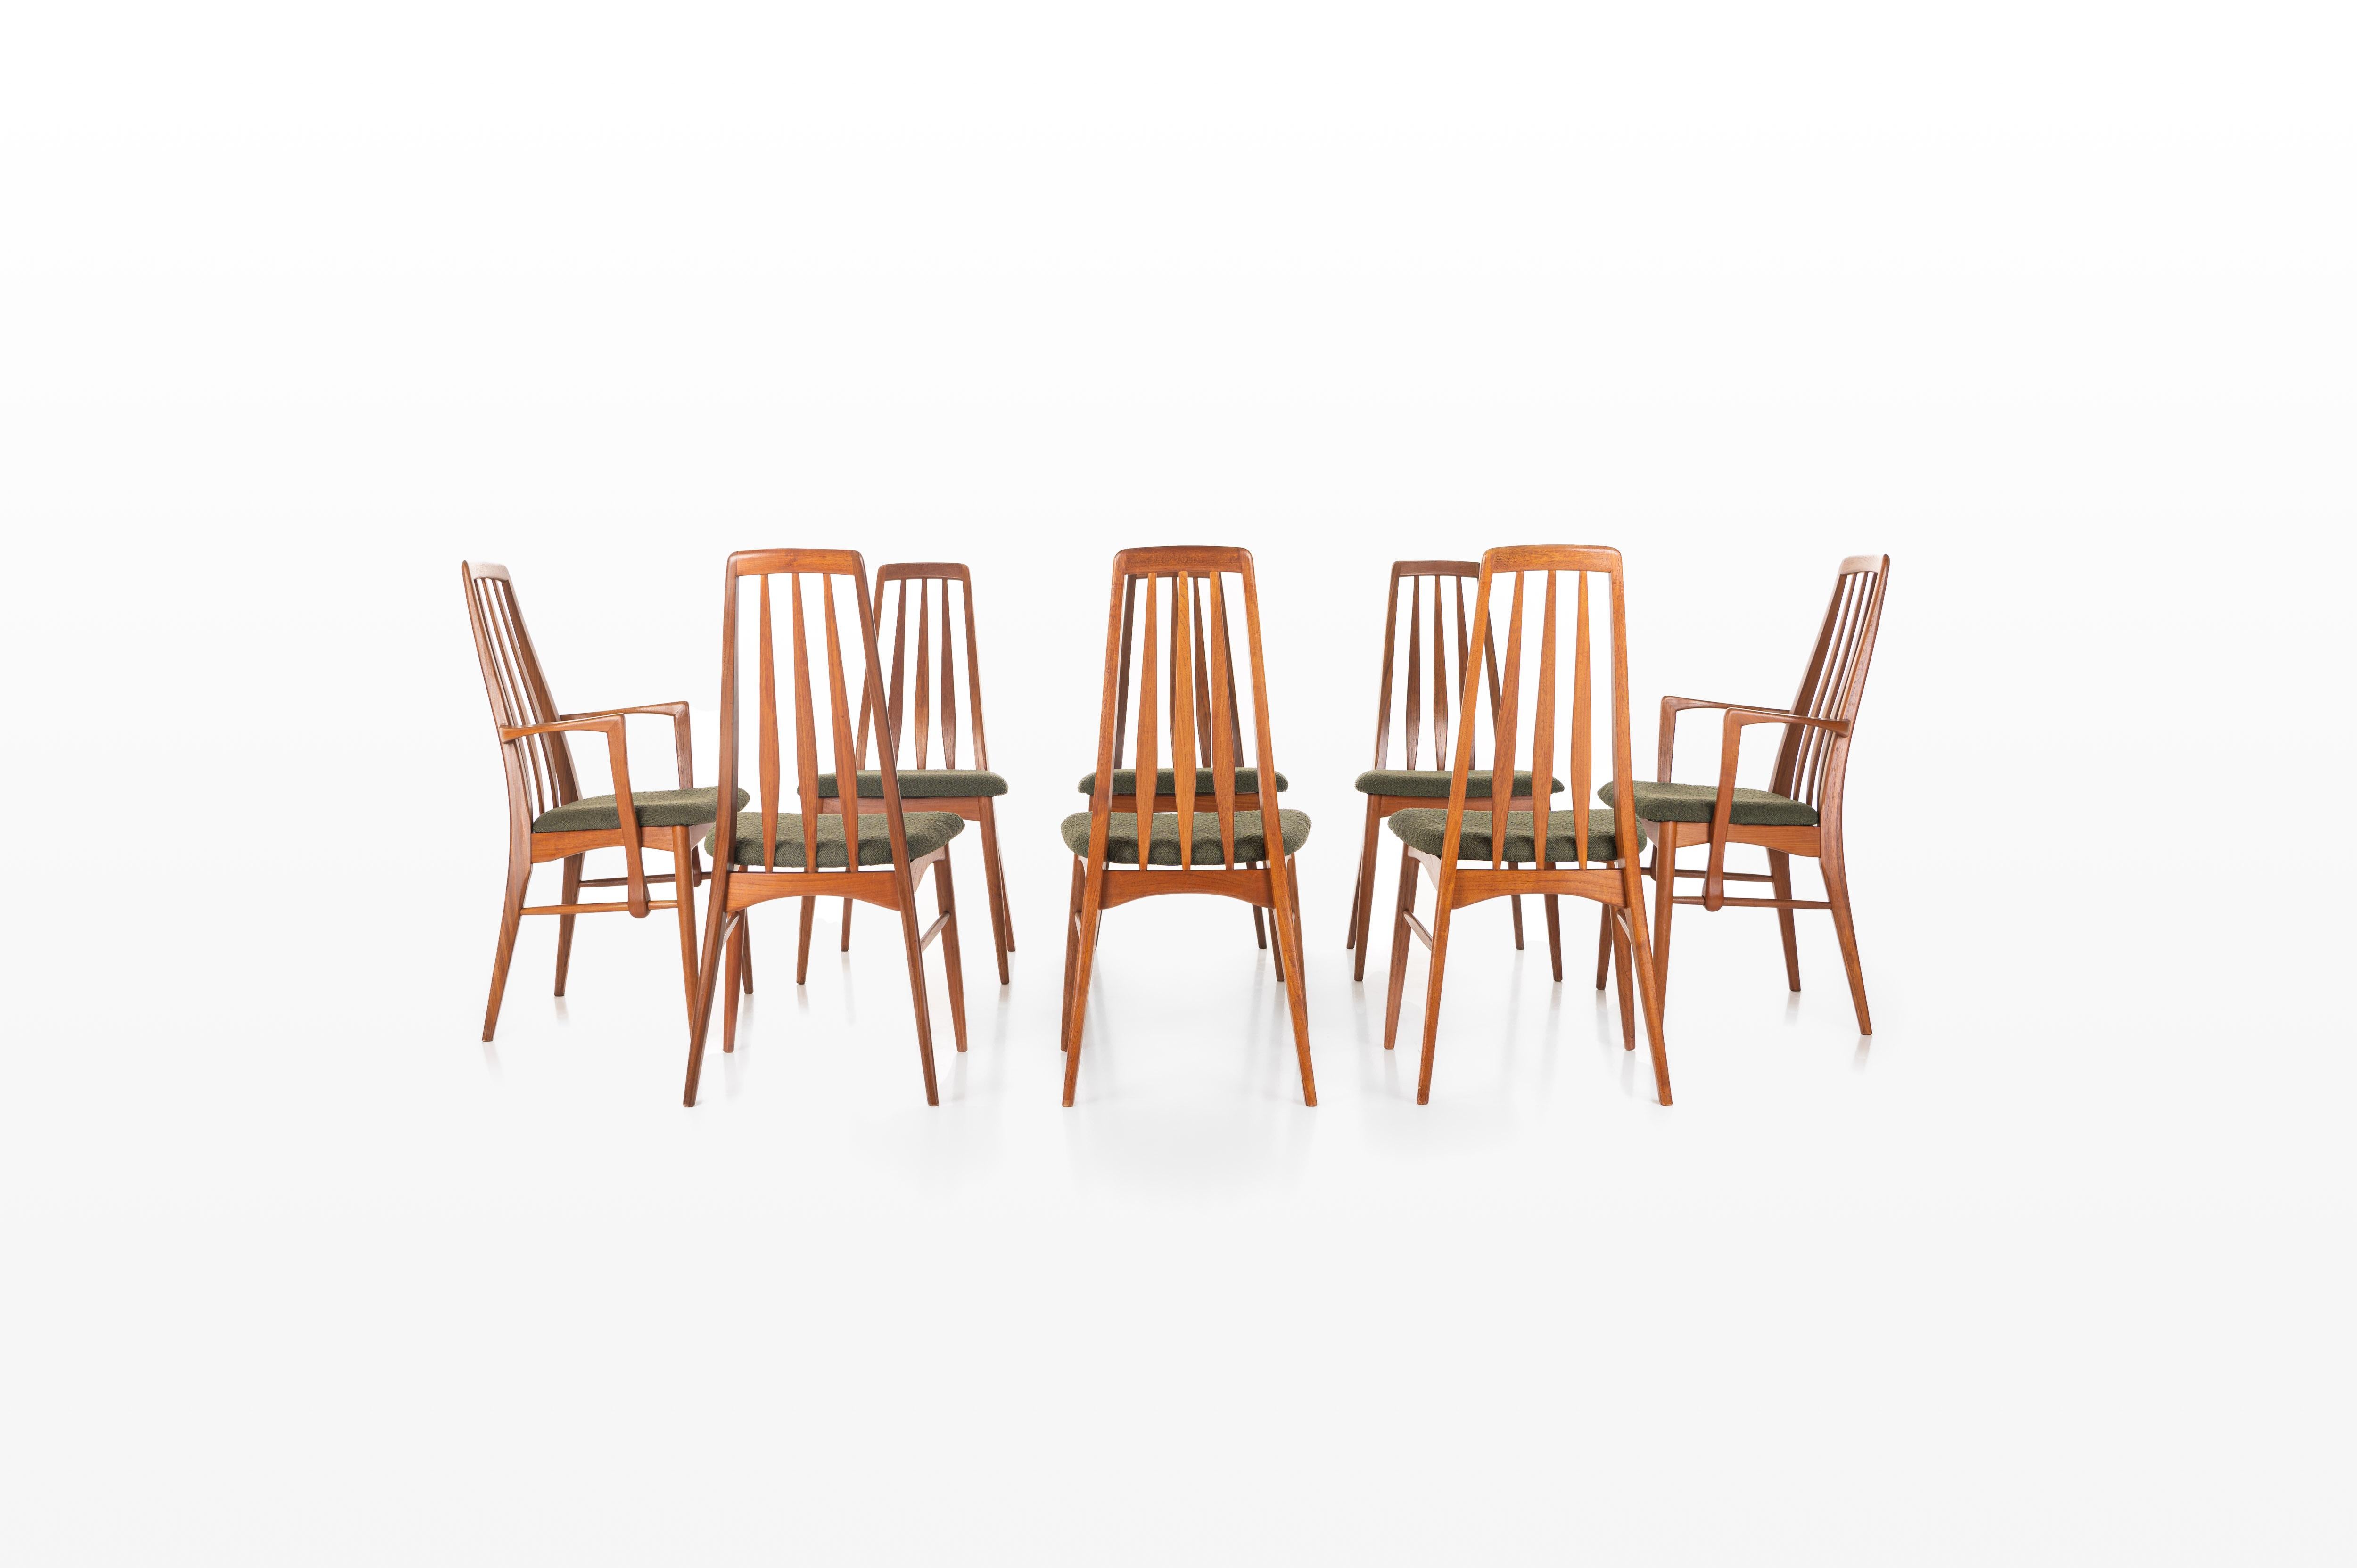 Set of eight vintage dining room chairs. These “Eva” chairs are designed by Niels Koefoed for Koefoeds Hornslet in Denmark. They have a teak frame and a new khaki green upholstery.